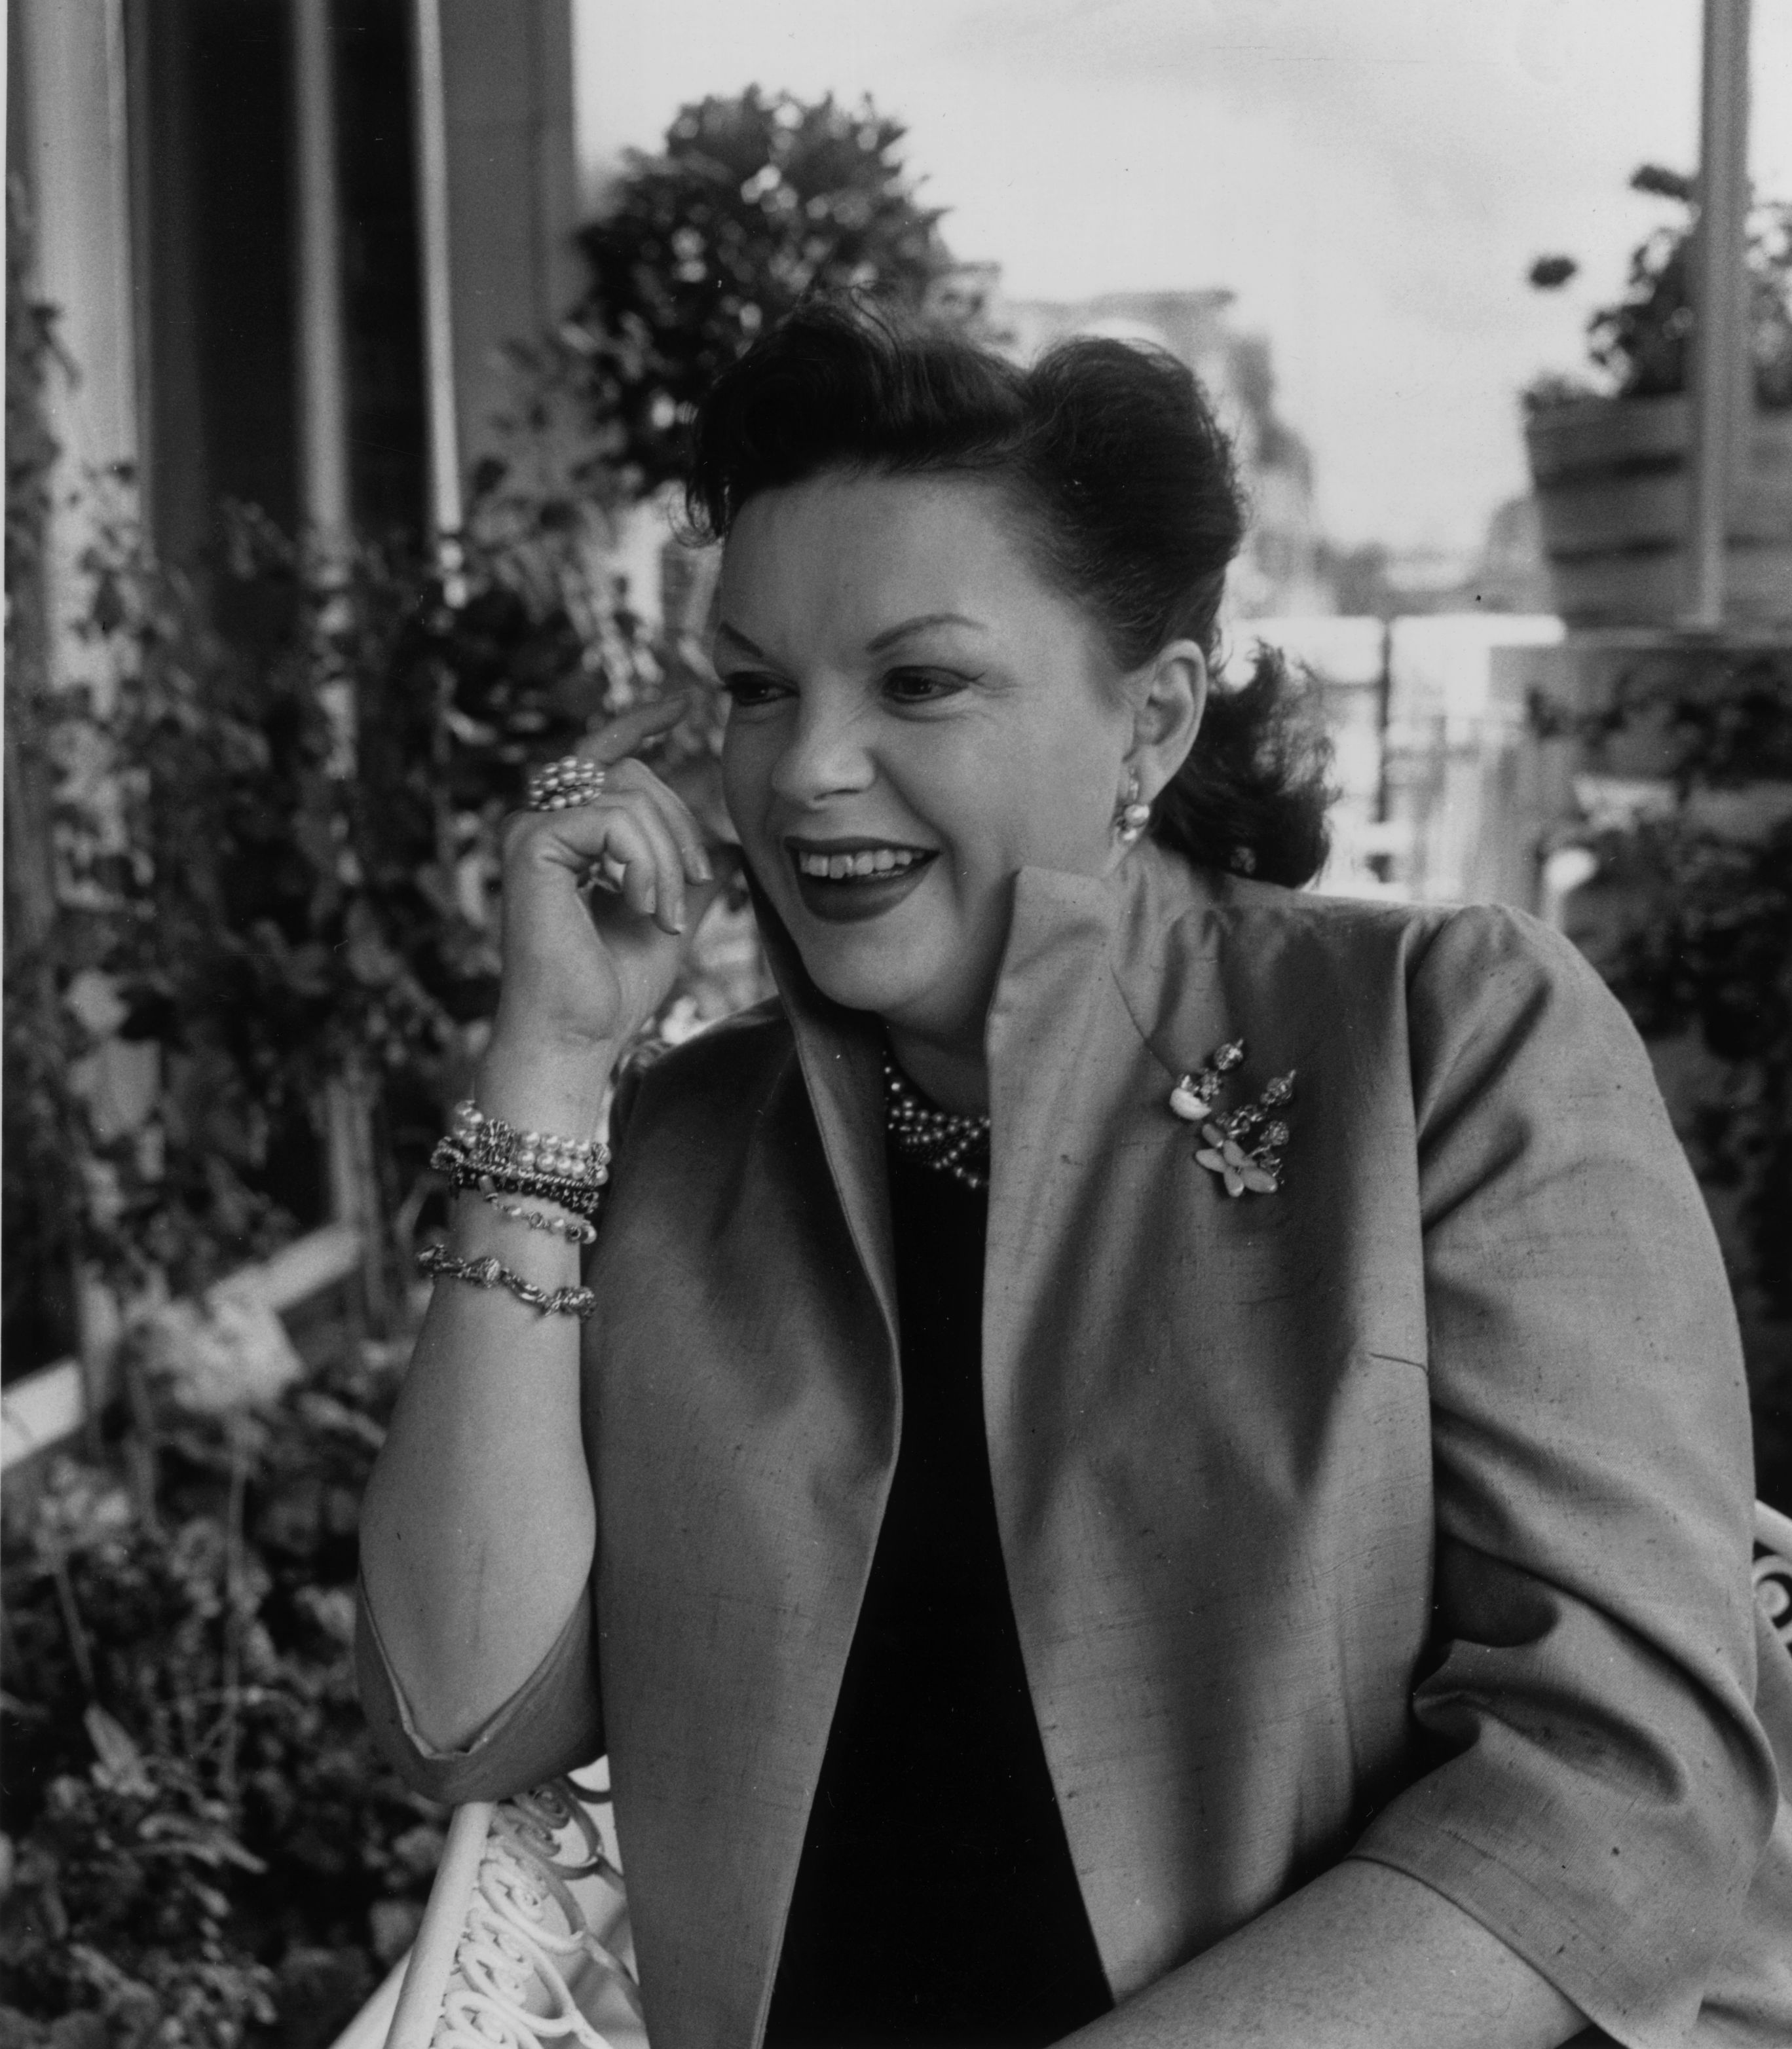 American singer and actress Judy Garland (1922 - 1969) at the Mayfair Hotel, London. | Source: Getty Images